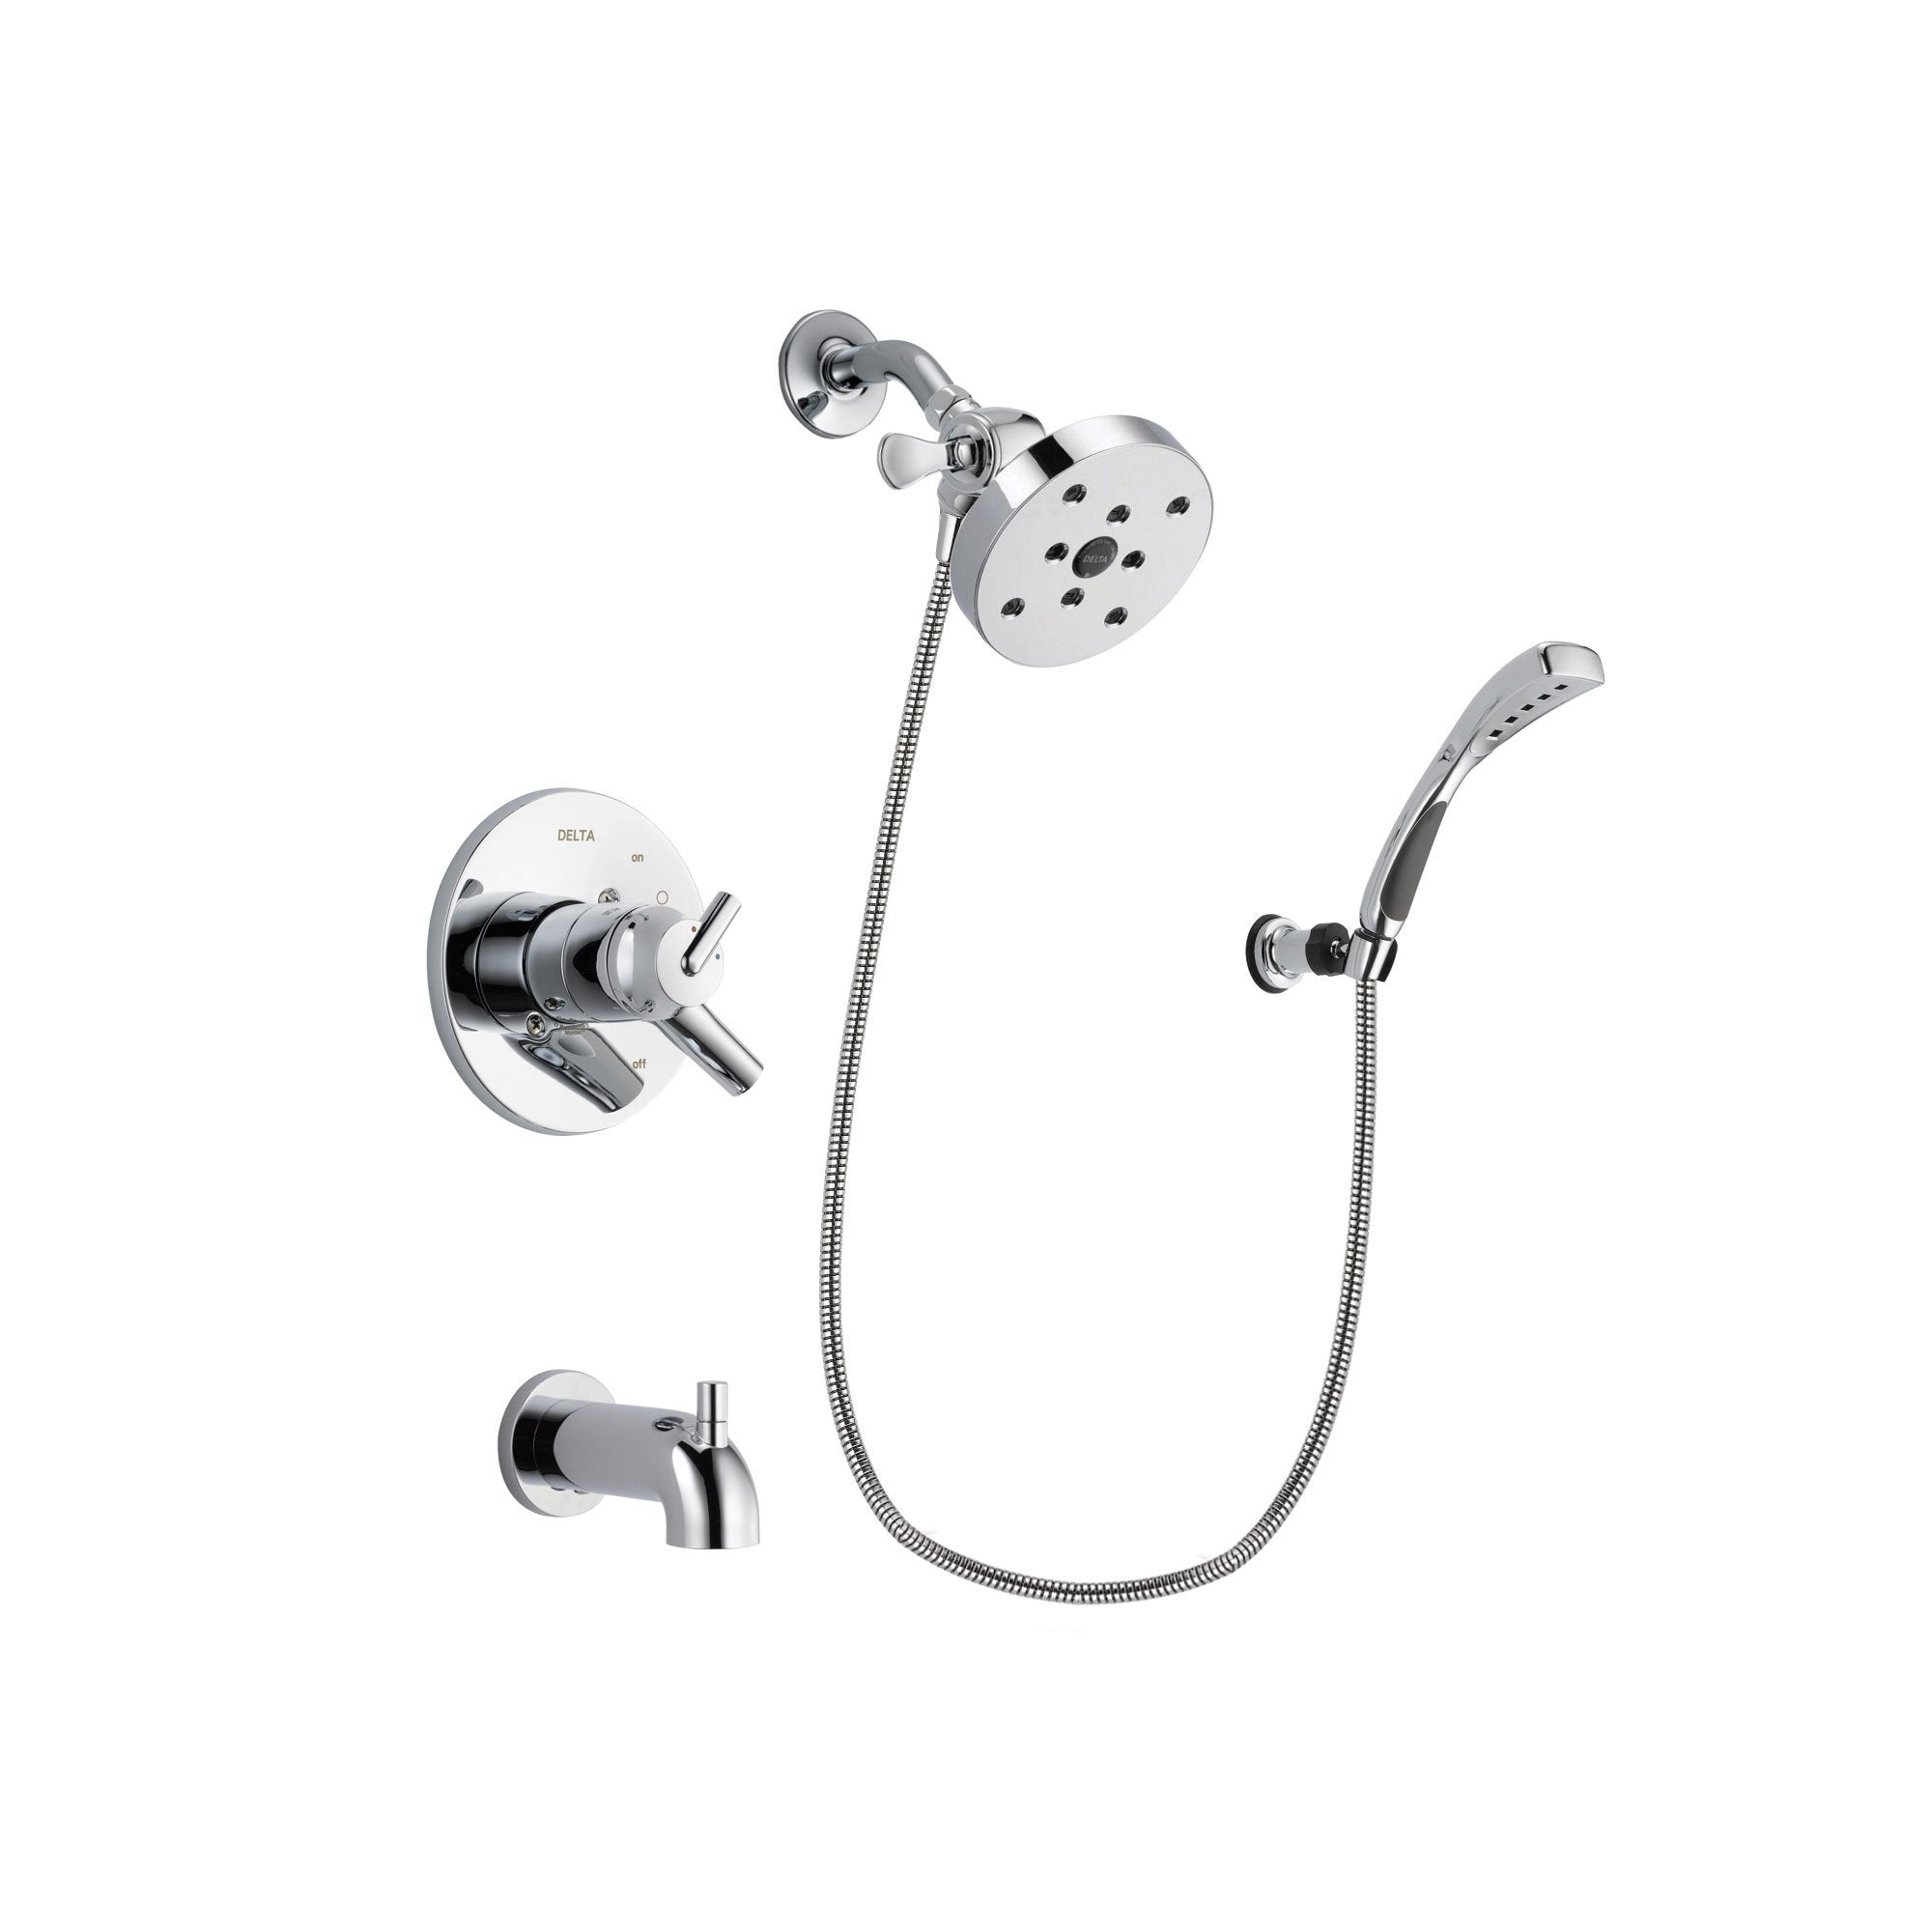 Delta Trinsic Chrome Finish Dual Control Tub and Shower Faucet System Package with 5-1/2 inch Shower Head and Wall-Mount Bracket with Handheld Shower Spray Includes Rough-in Valve and Tub Spout DSP1093V